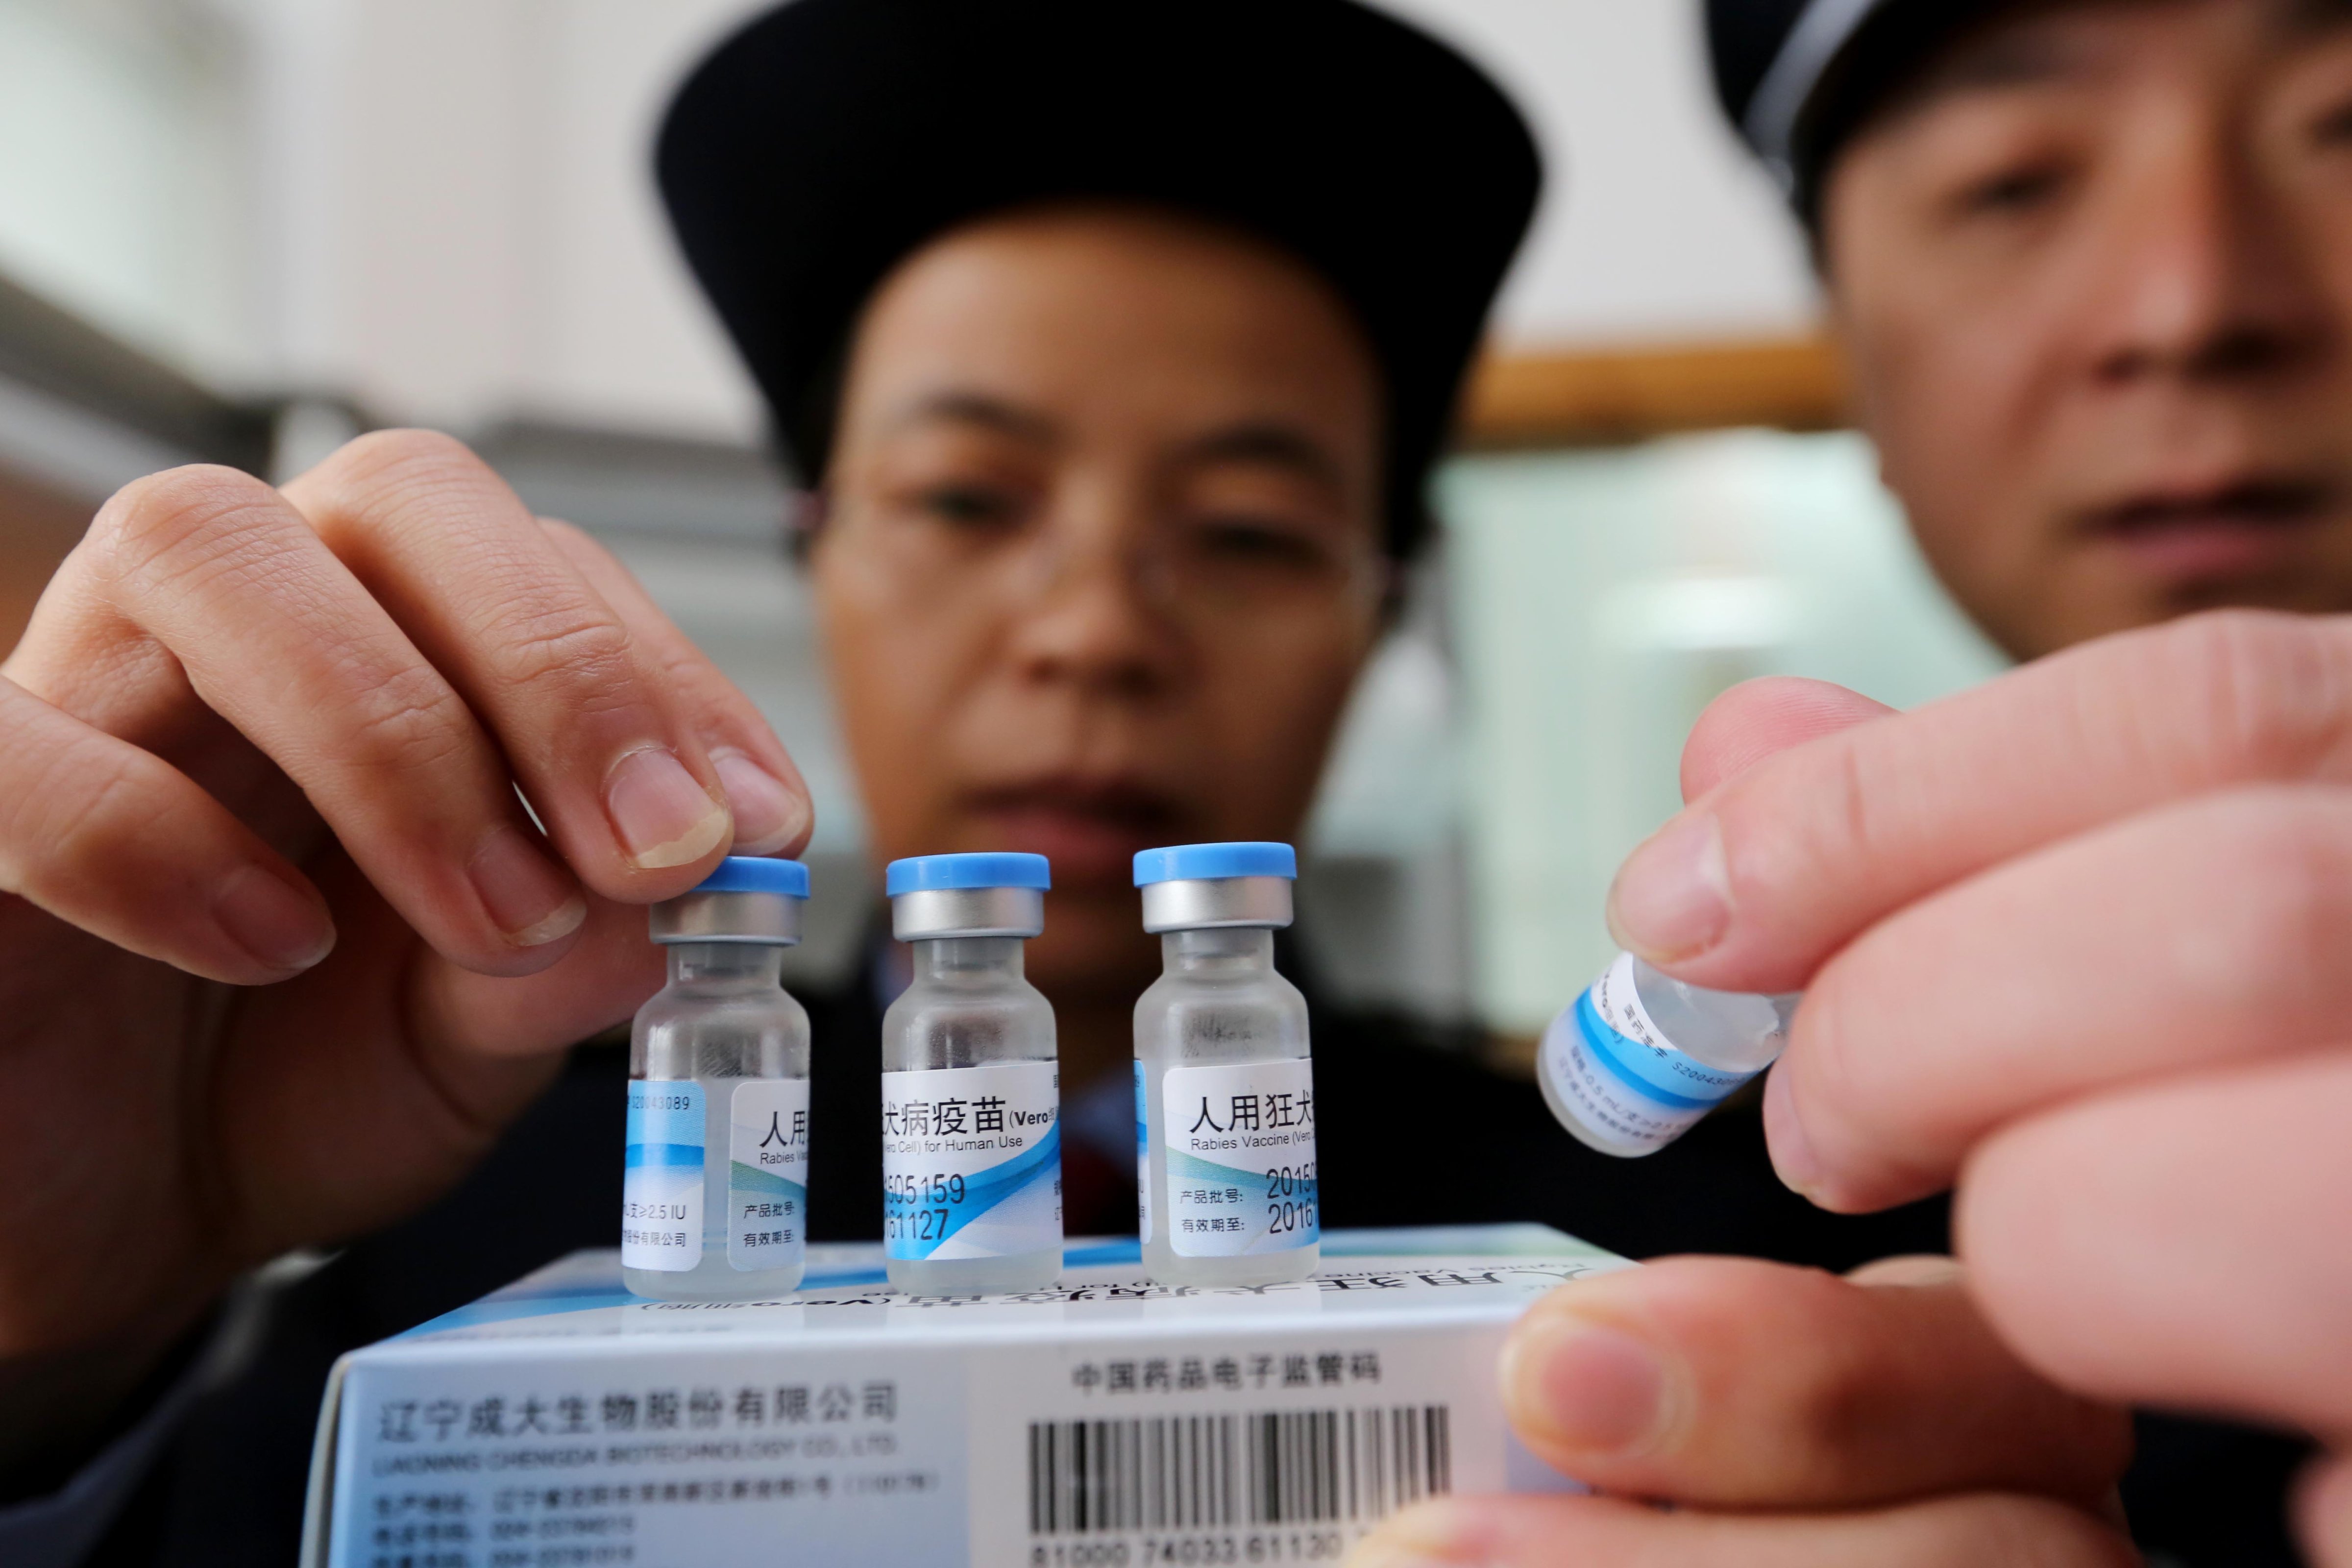 China vows crackdown on fake vaccines amid scandal